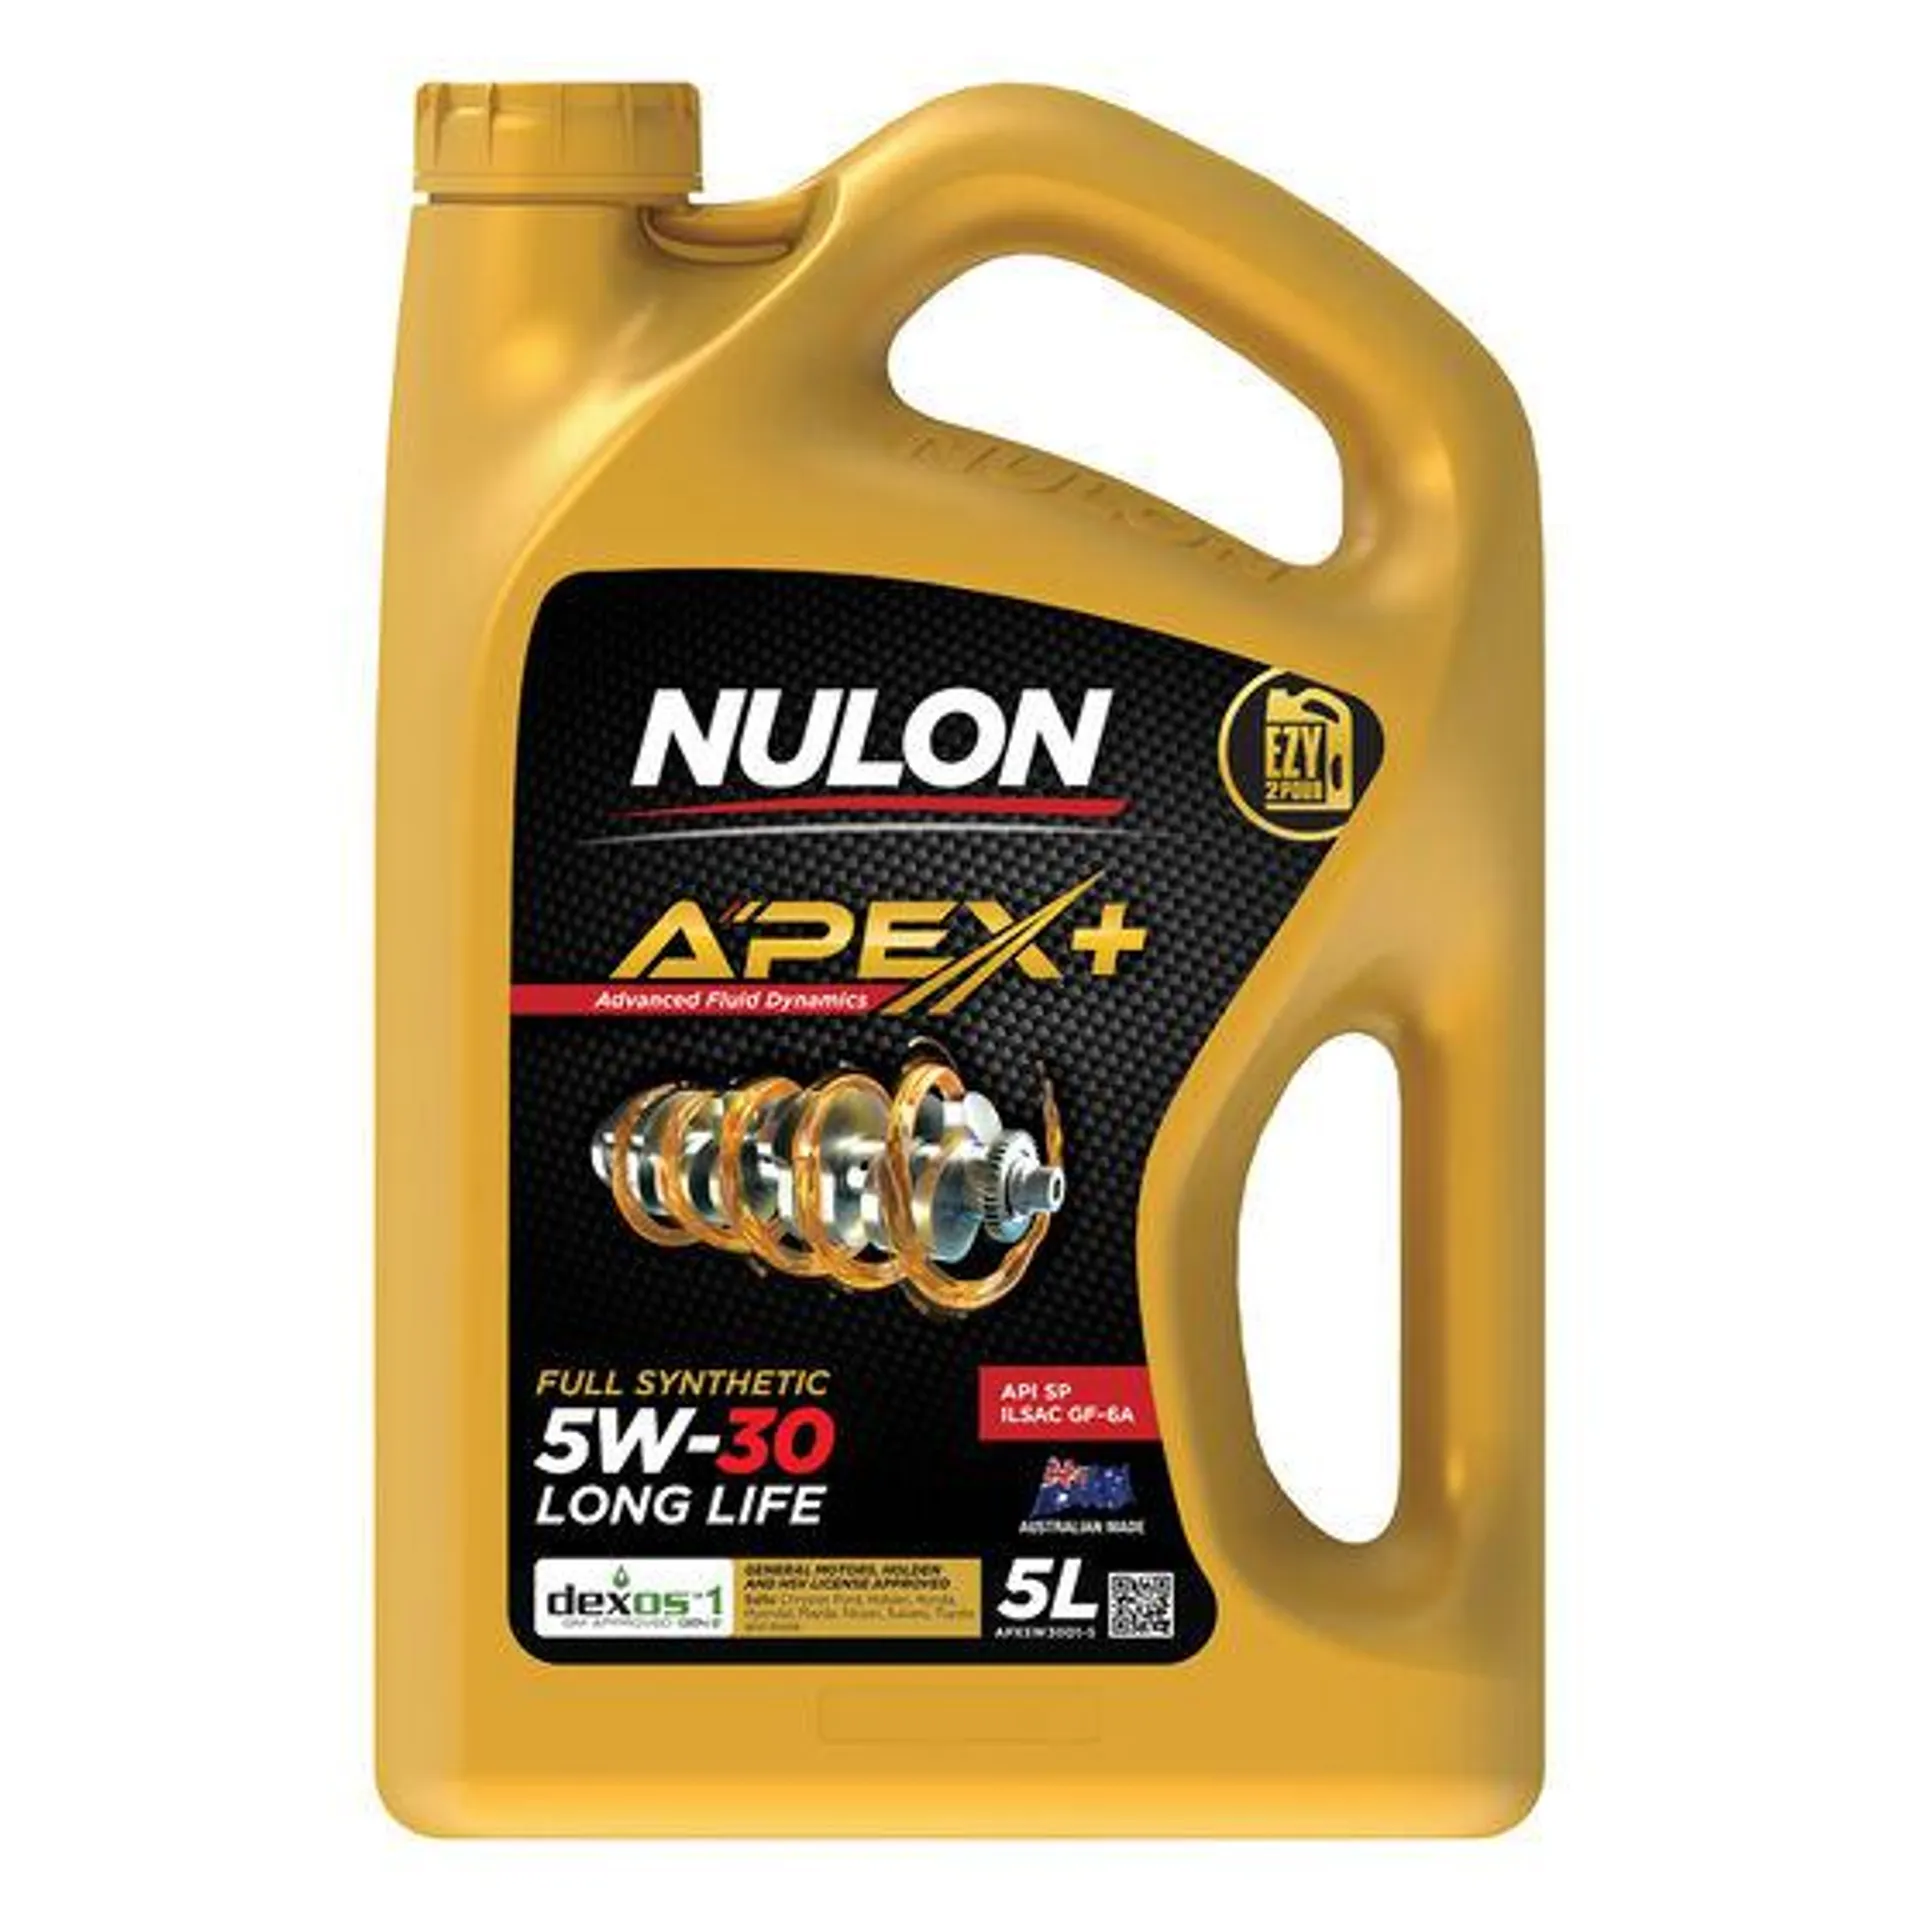 Nulon Full Synthetic Long Life Engine Oil - 5W-30 5 Litre